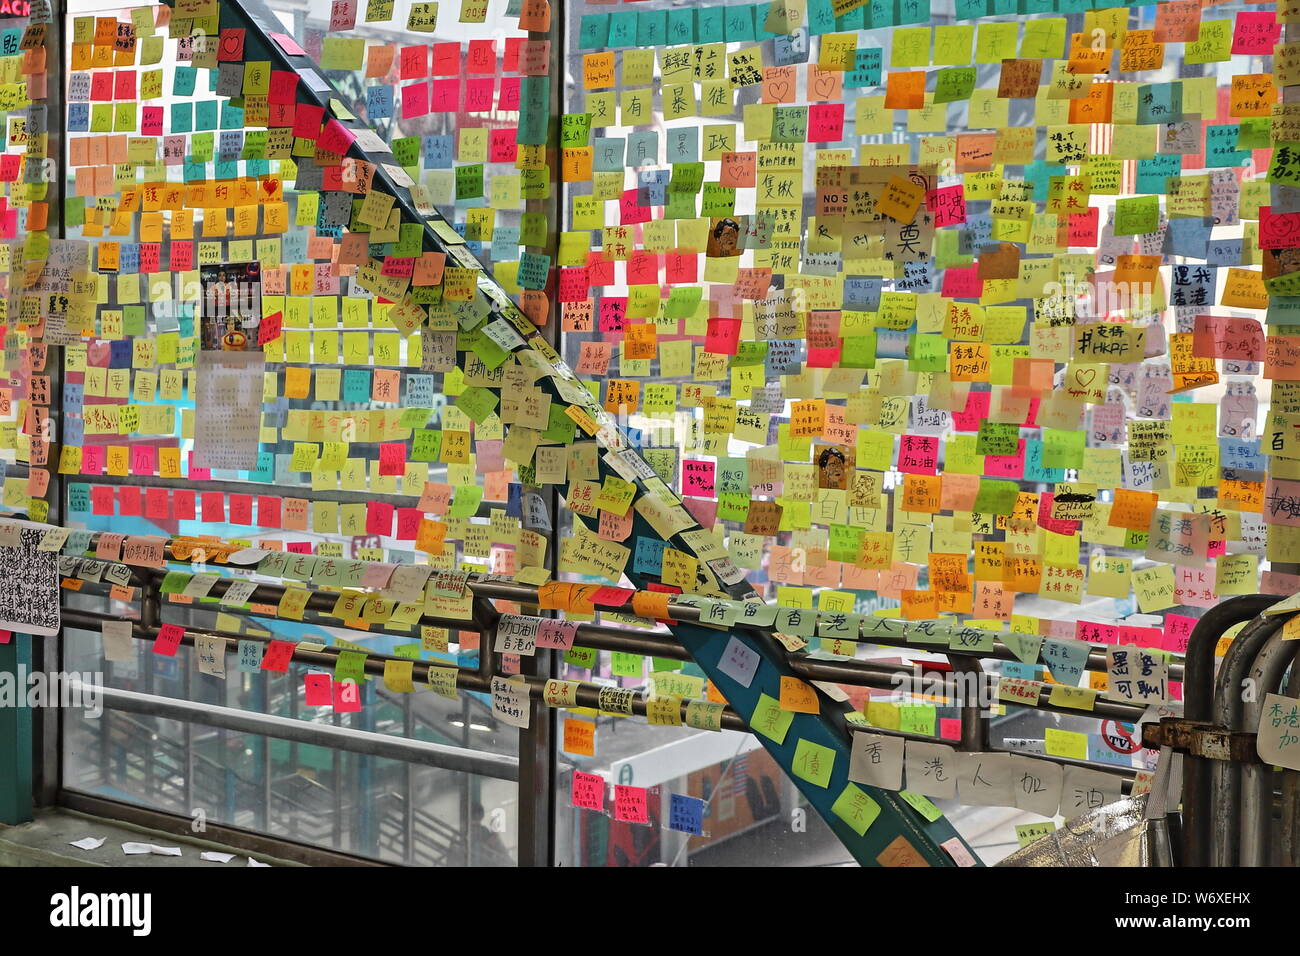 CAUSEWAY BAY, HONG KONG - JULY 17, 2019: Lennon Wall with Post It notes stuck on the glass of the Hennessey Road pedestrian overpass, showing support Stock Photo